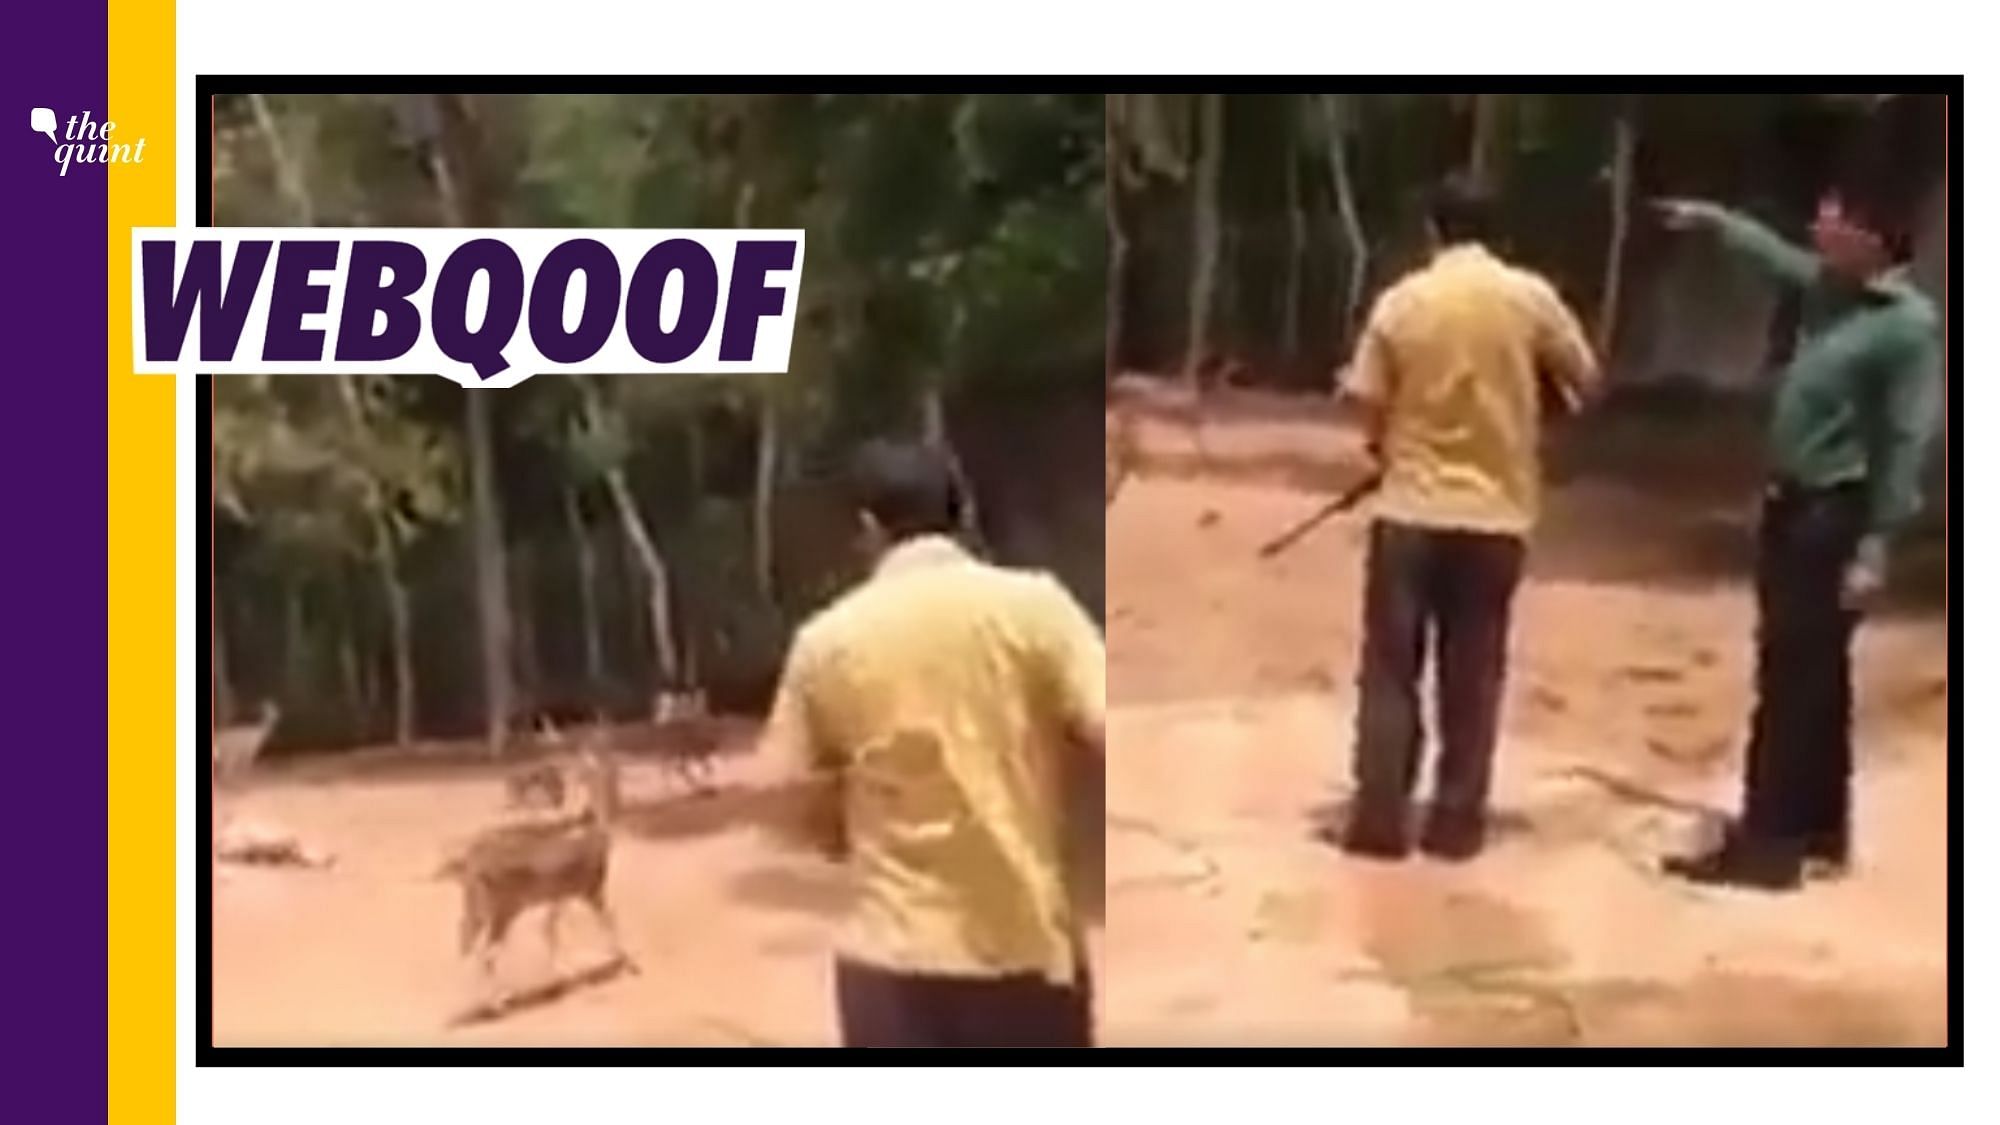 A viral video falsely claims to show BJP MLA ‘Anil Upadhyay’ learning how to shoot and hunt down a deer in a park.